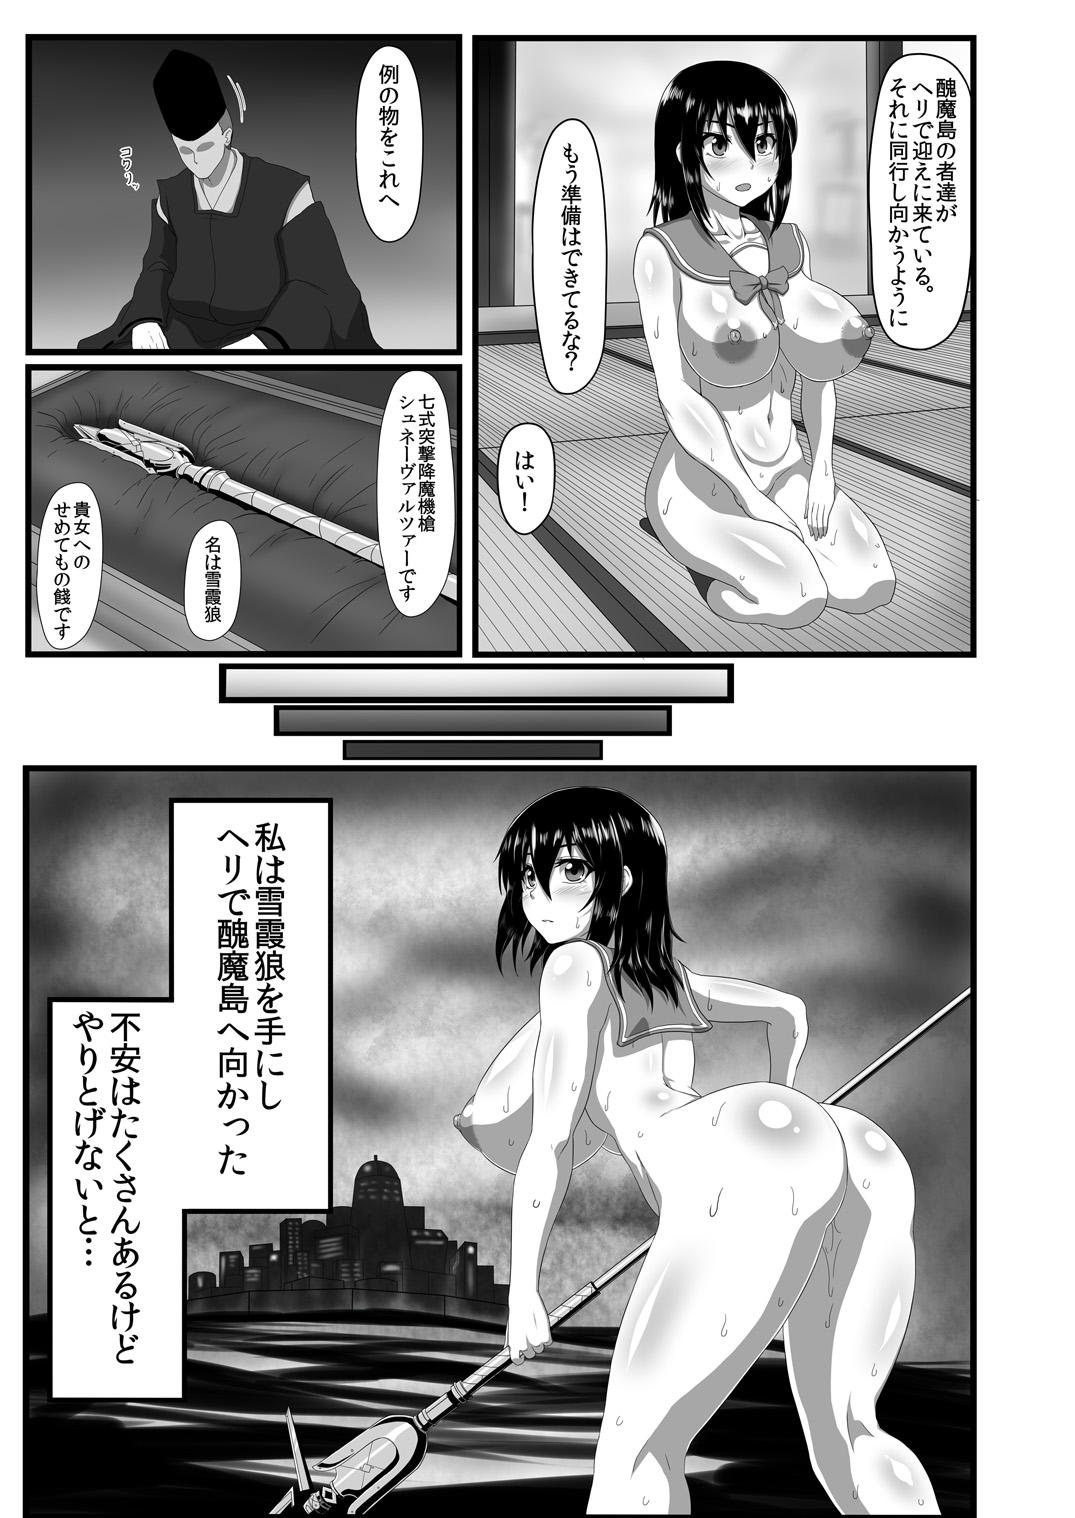 Italian Slave the Blood - Strike the blood Solo Female - Page 10